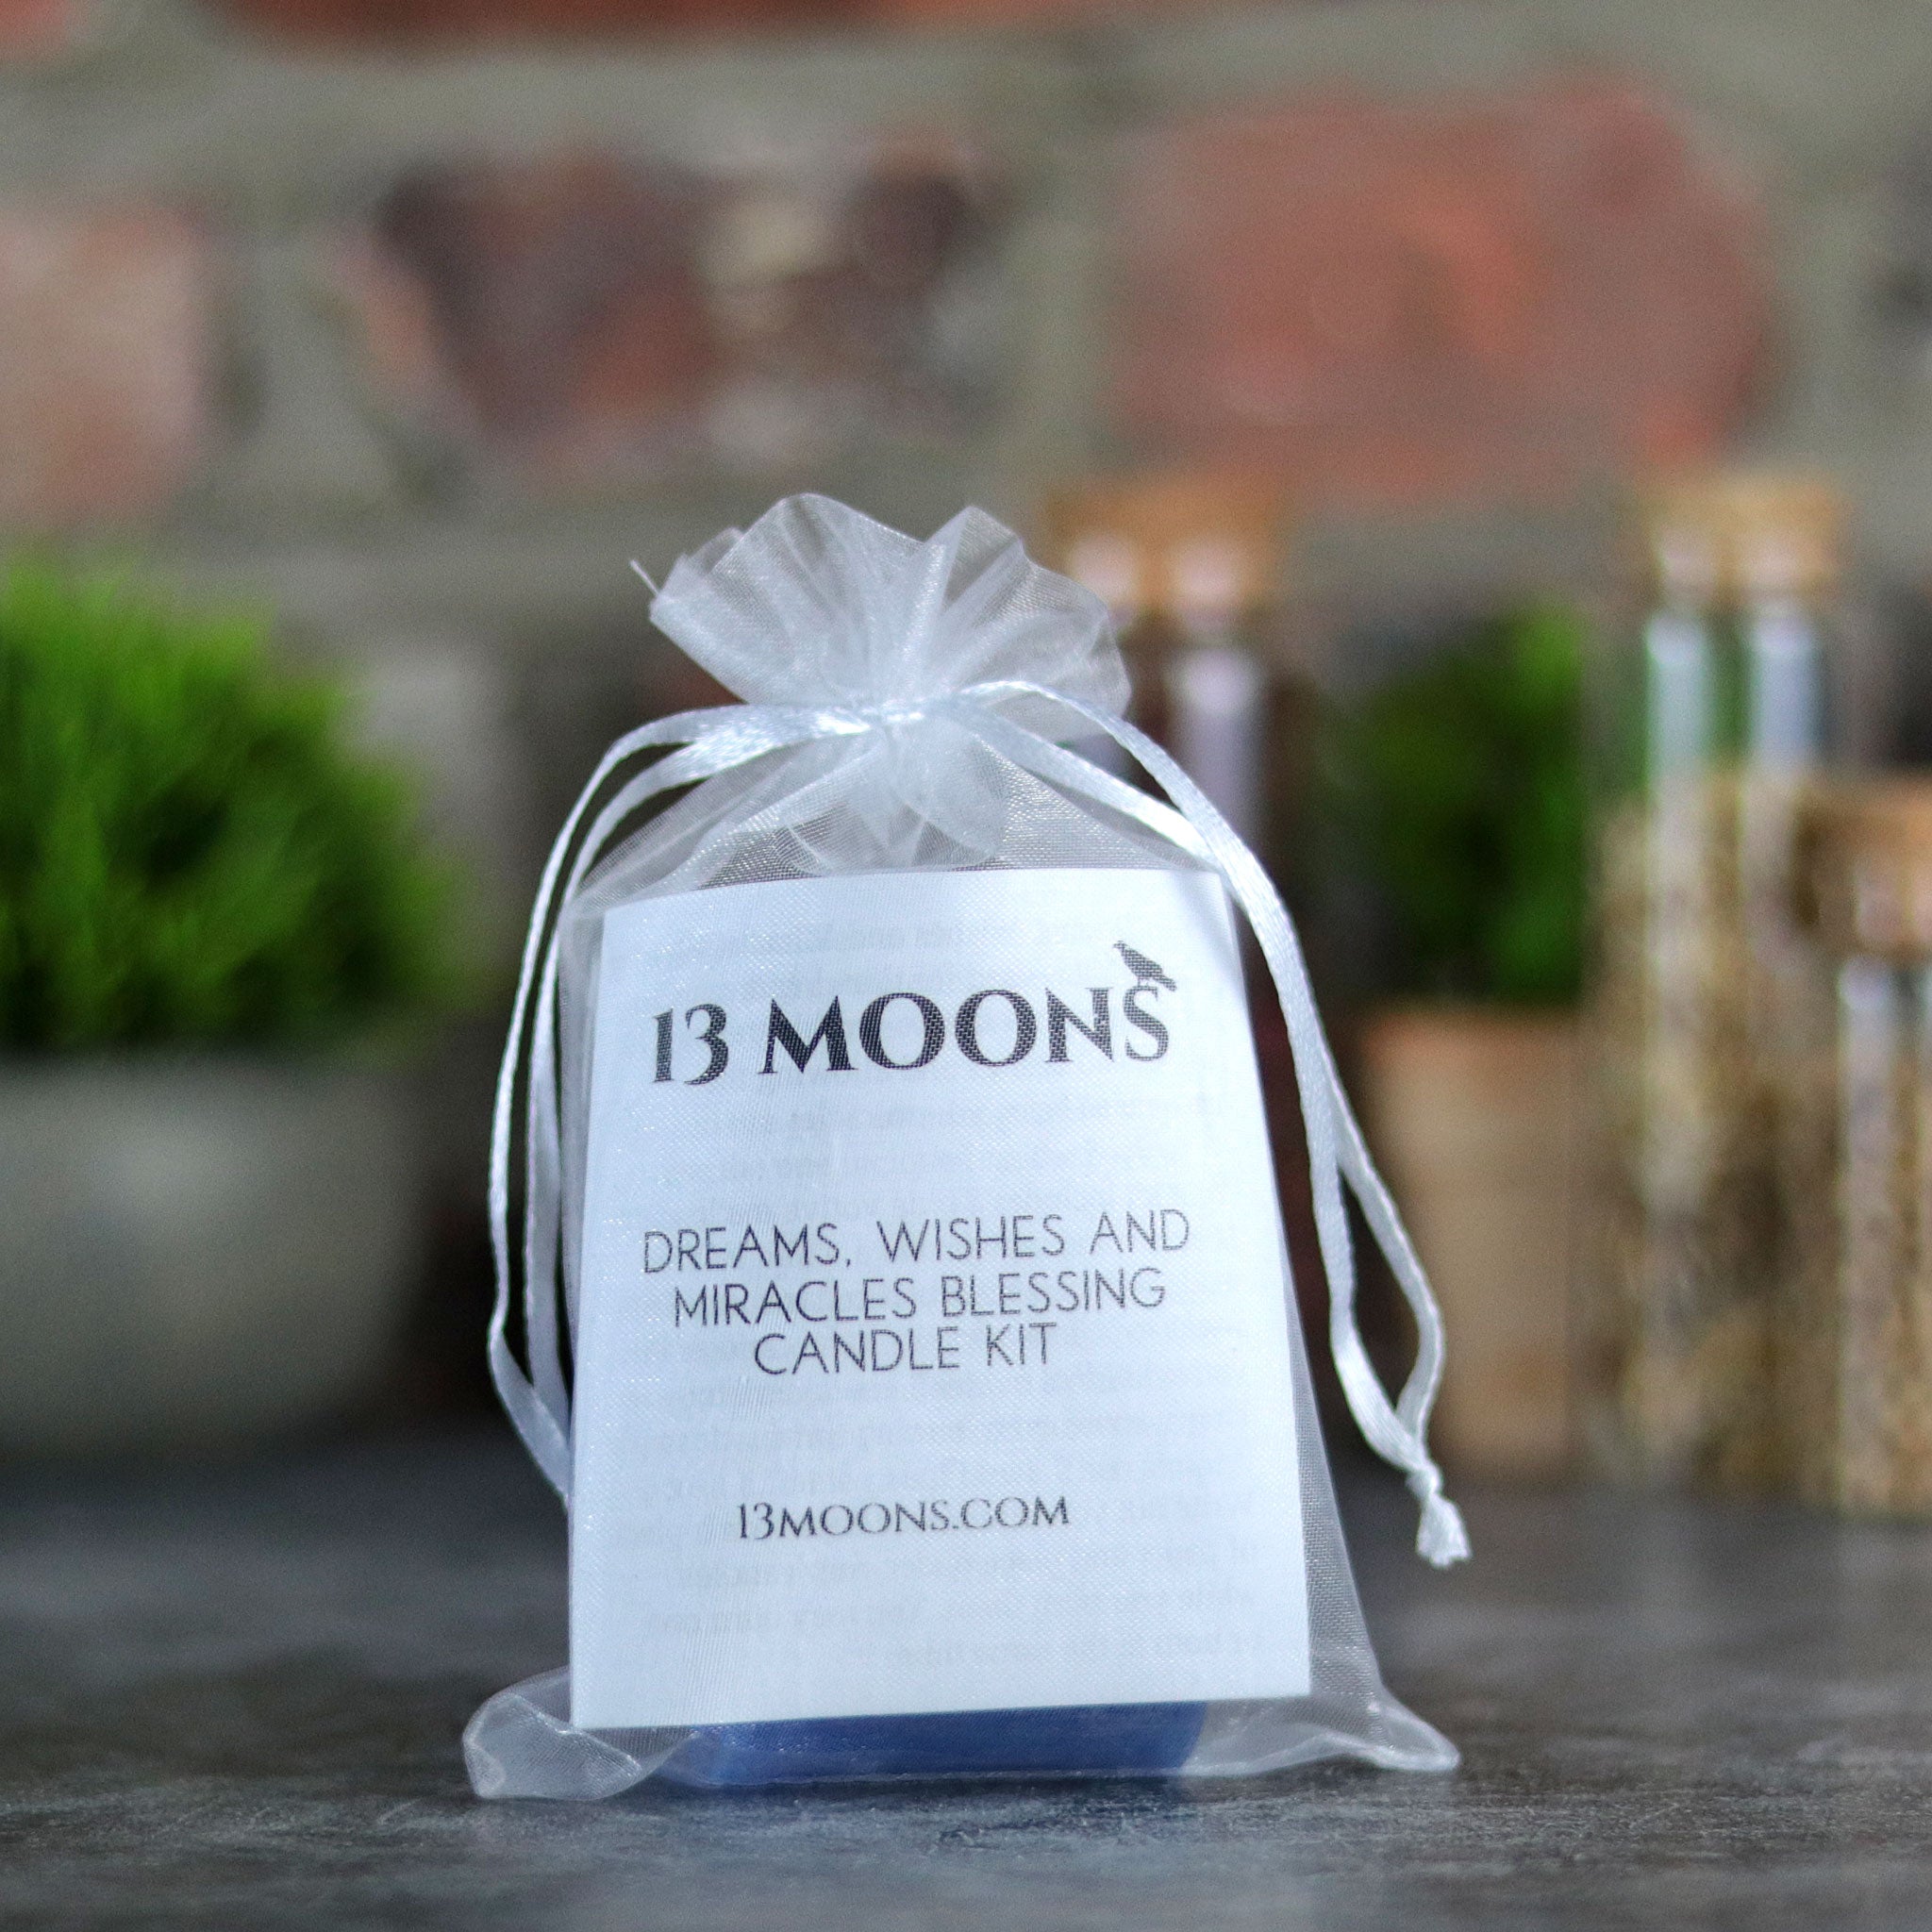 Dreams, Wishes and Miracles Blessing Candle Kit - 13 Moons